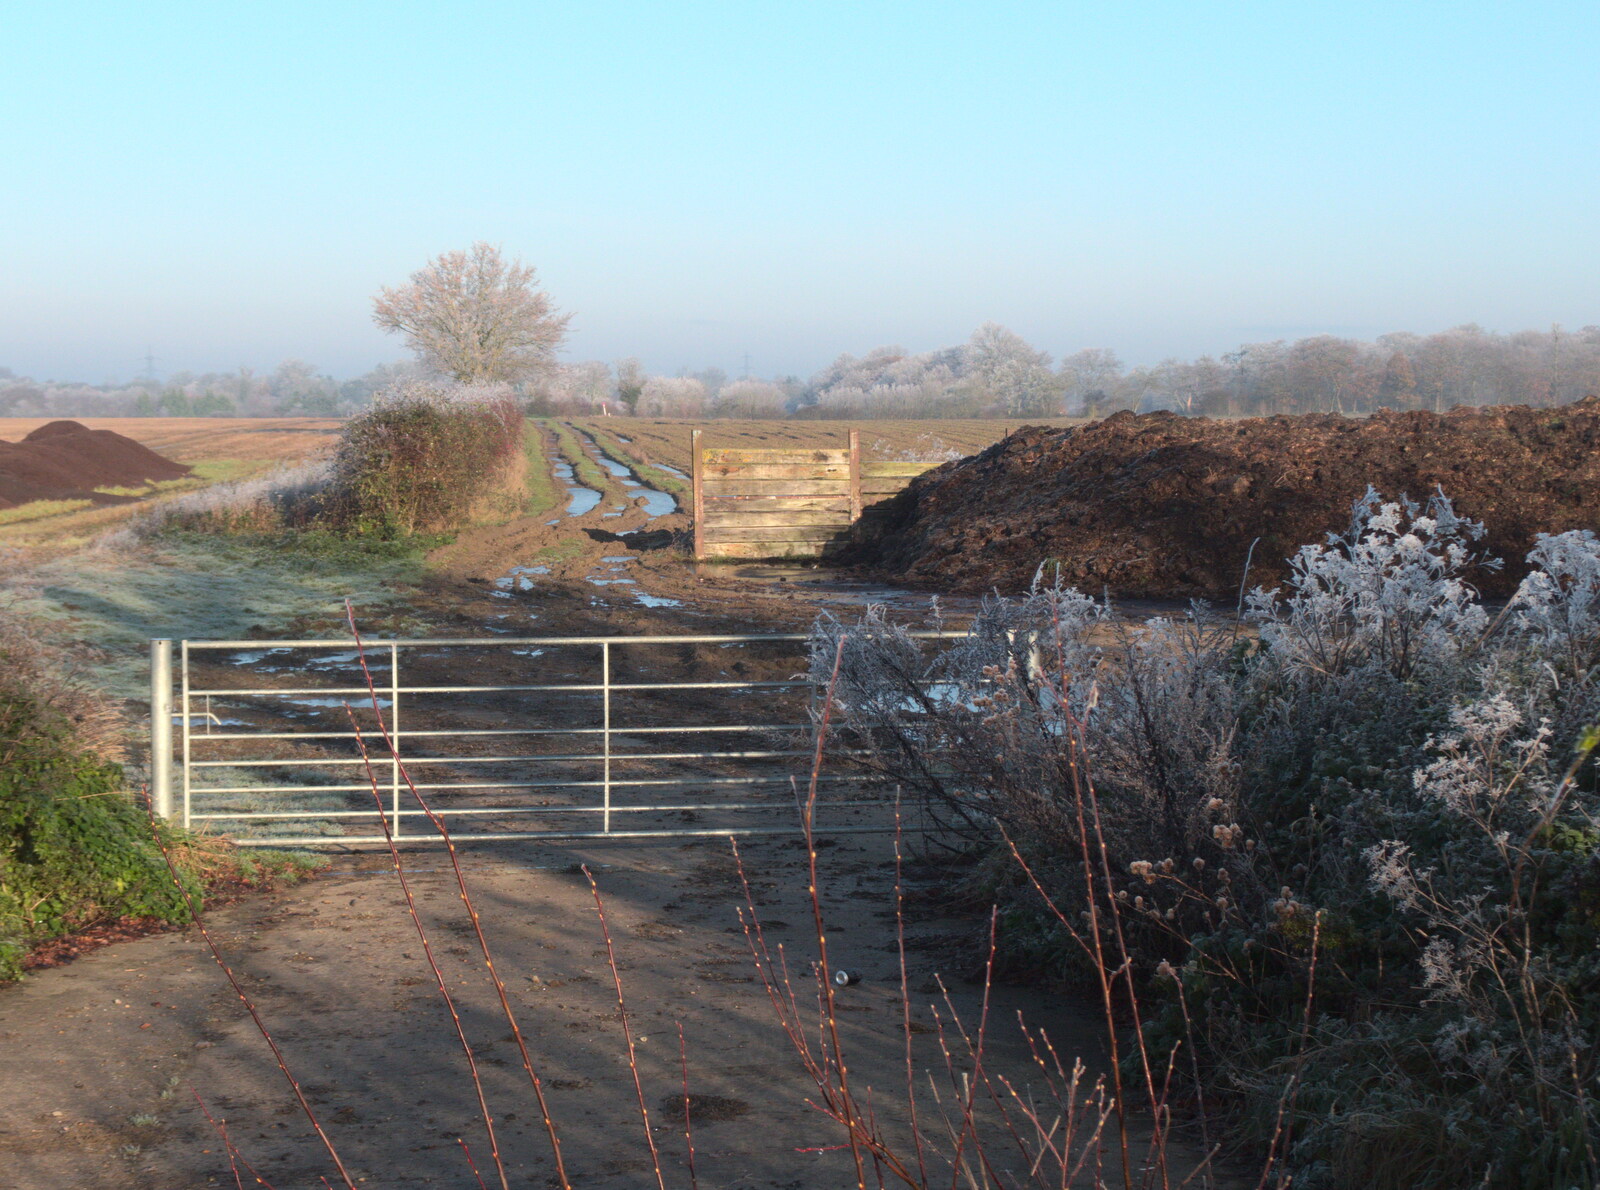 A gate and path off Yaxley Road from More Frosty Rides and the Old Mink Sheds, Brome, Suffolk - 10th December 2020